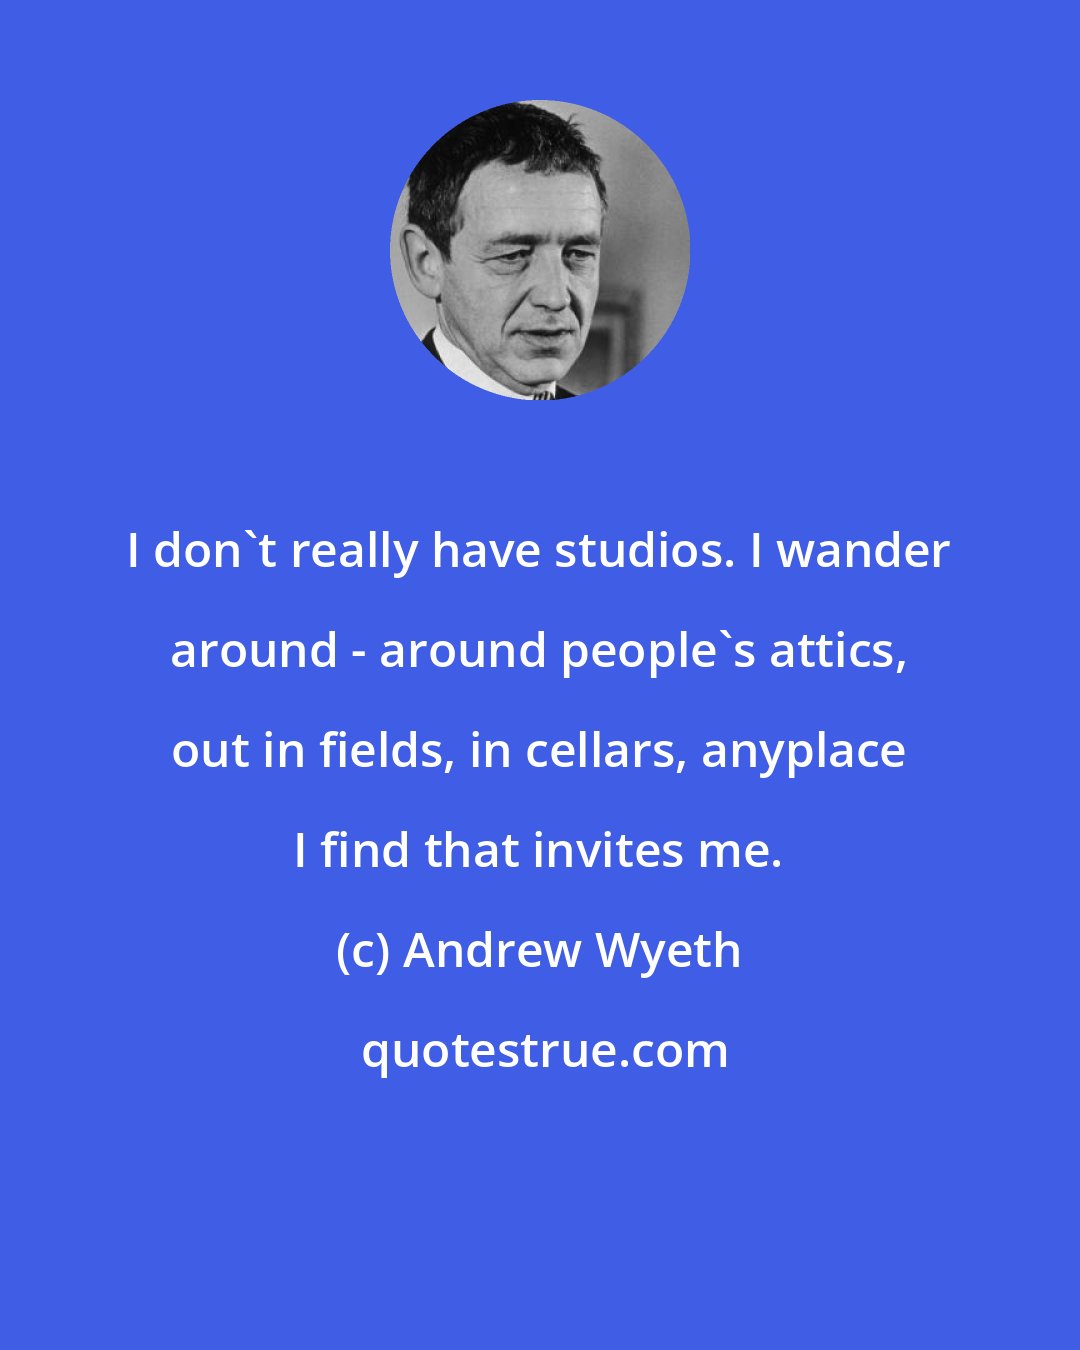 Andrew Wyeth: I don't really have studios. I wander around - around people's attics, out in fields, in cellars, anyplace I find that invites me.